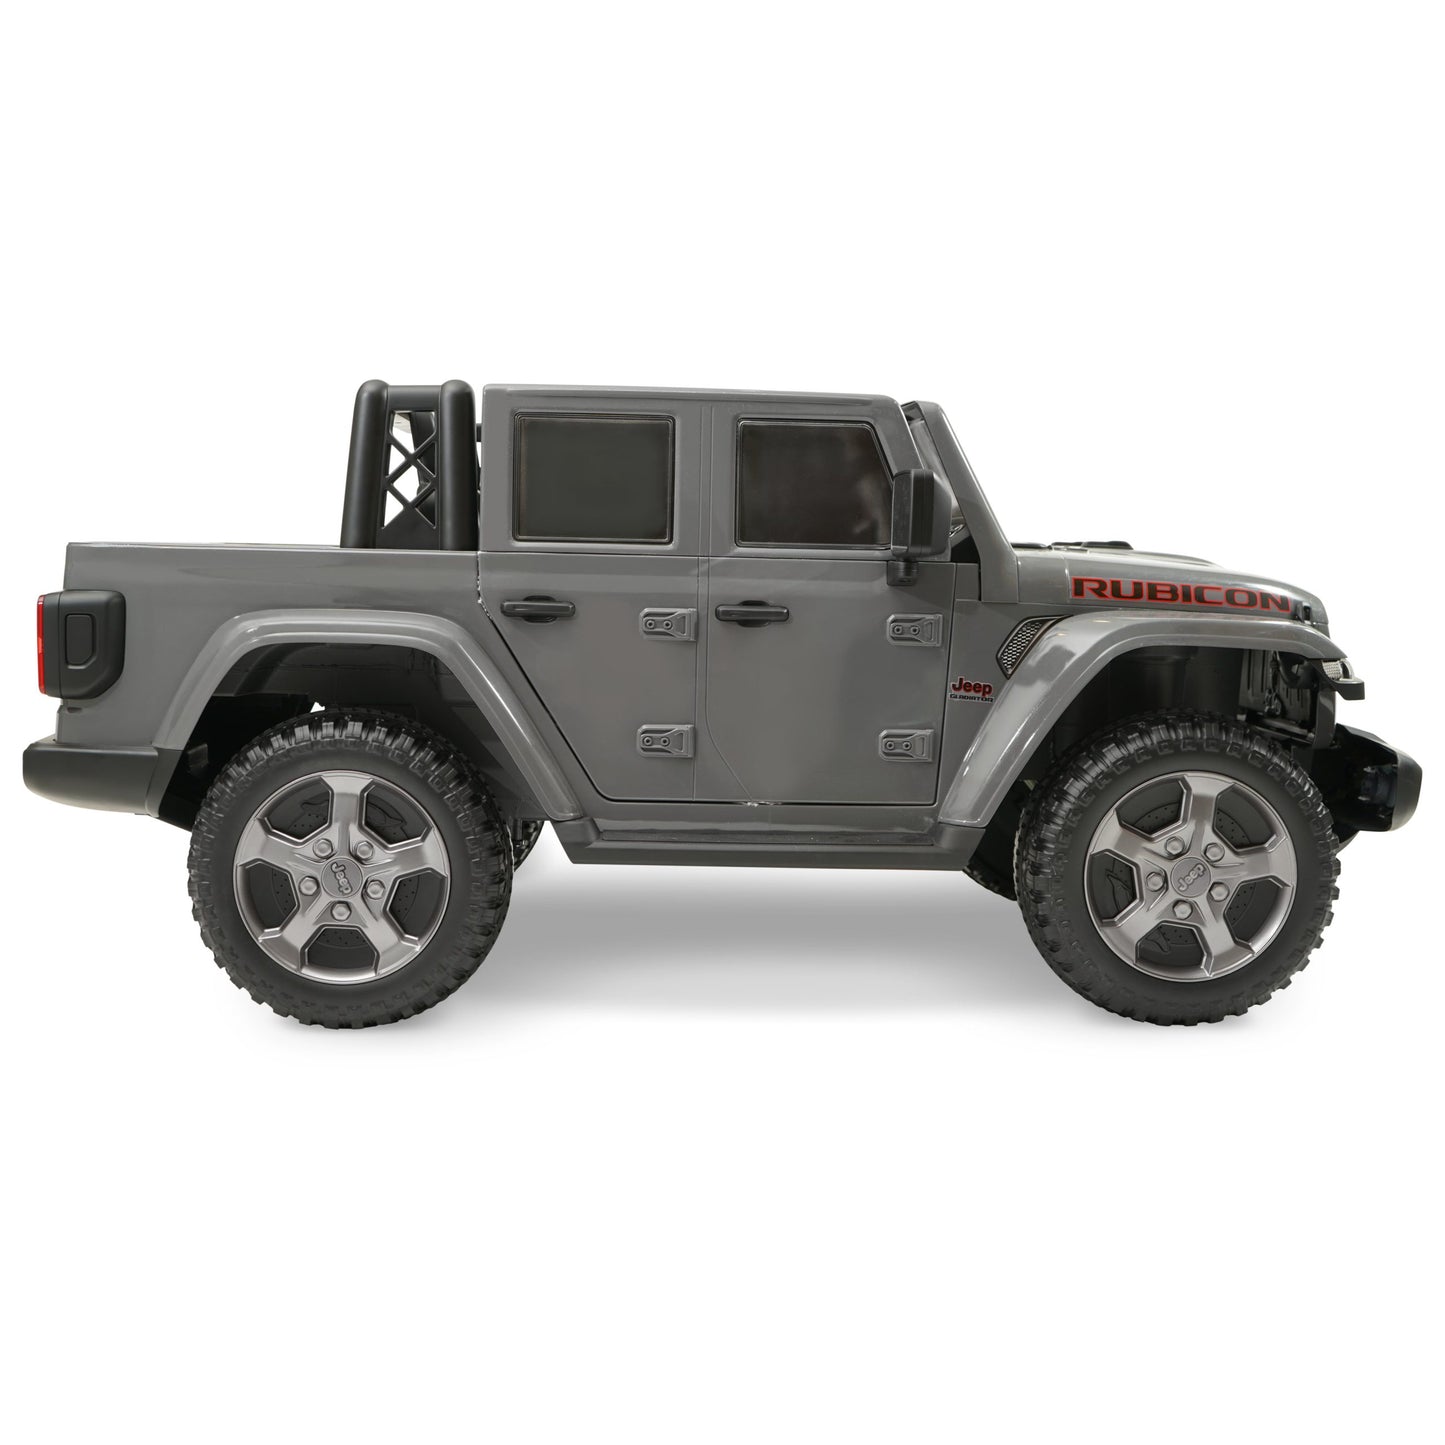 Power wheels jeep rubicon | 12 volt Licensed Jeep Gladiator | Battery Powered Ride On Vehicle, Gray HYP-J12-1210